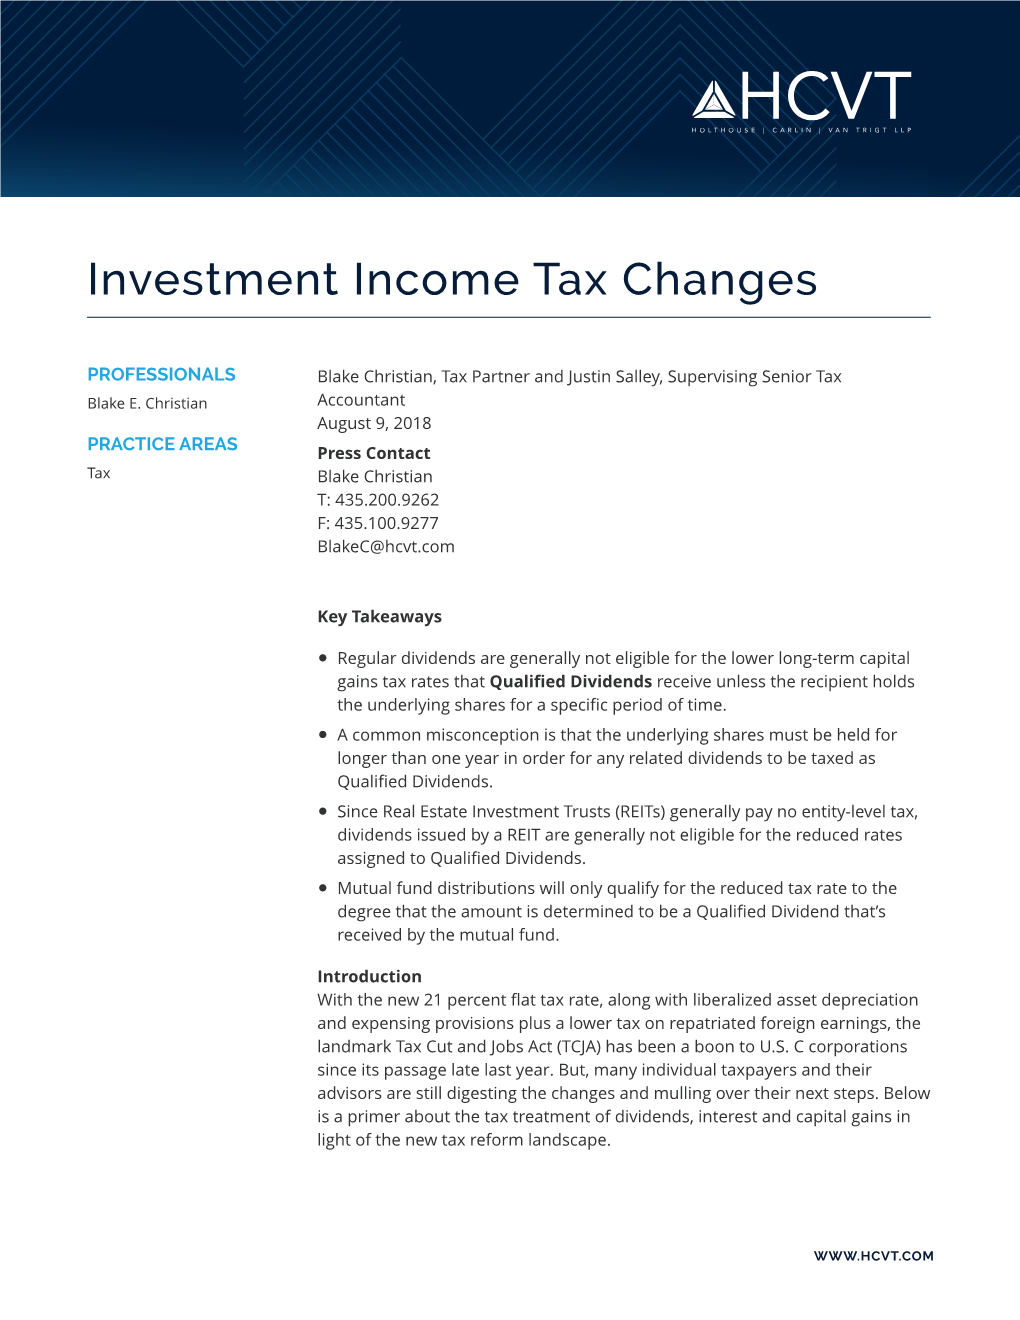 Investment Income Tax Changes